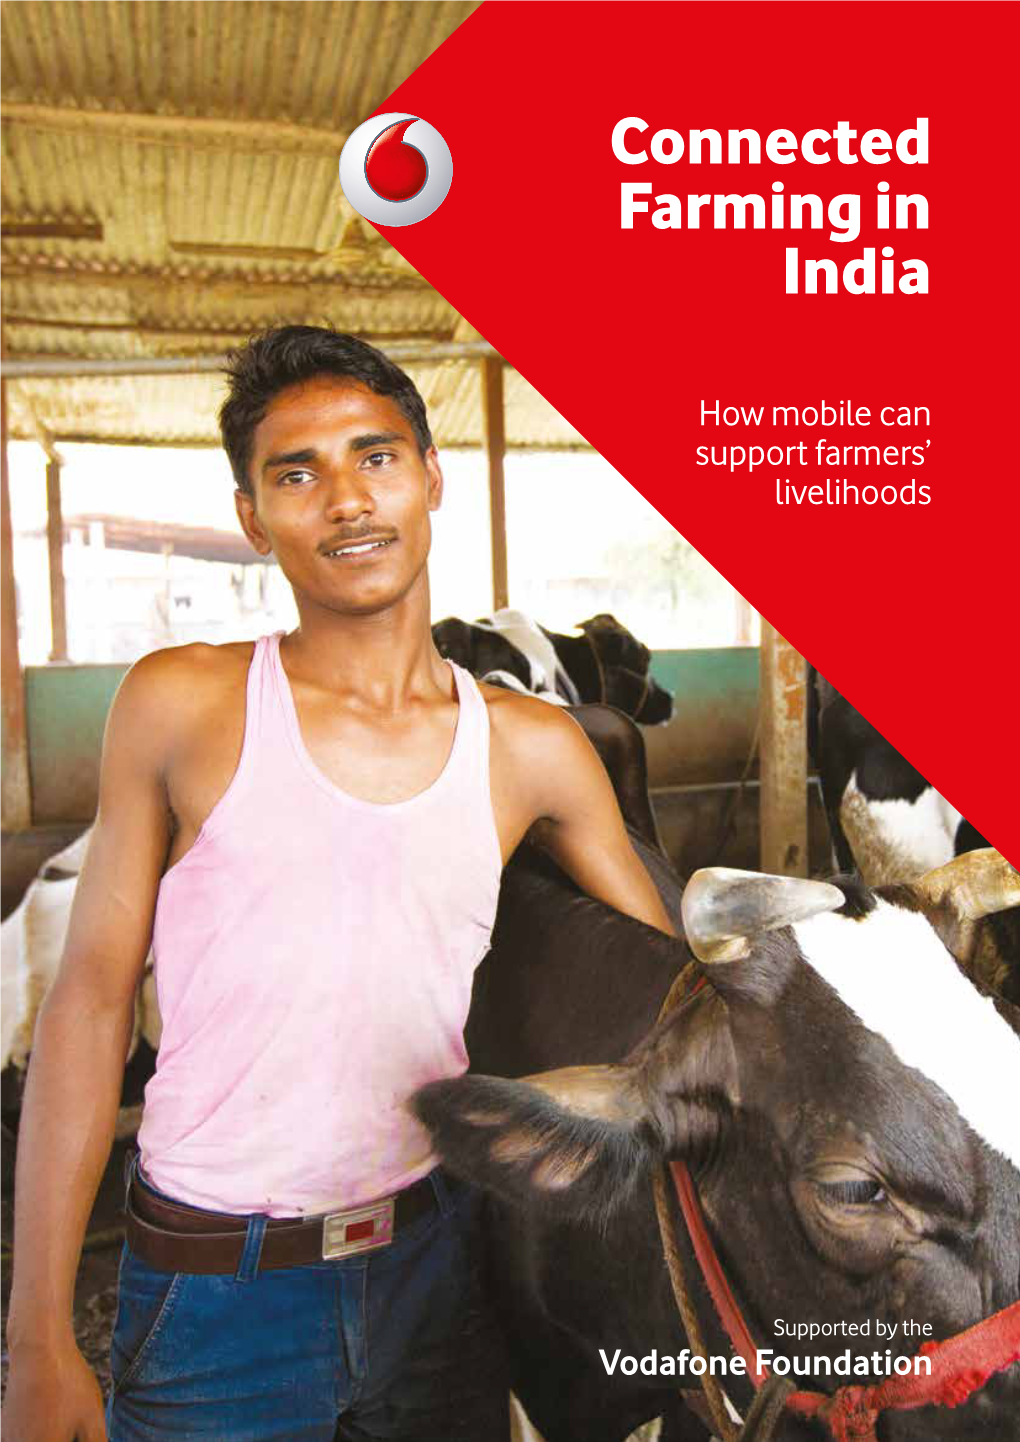 Connected Farming in India